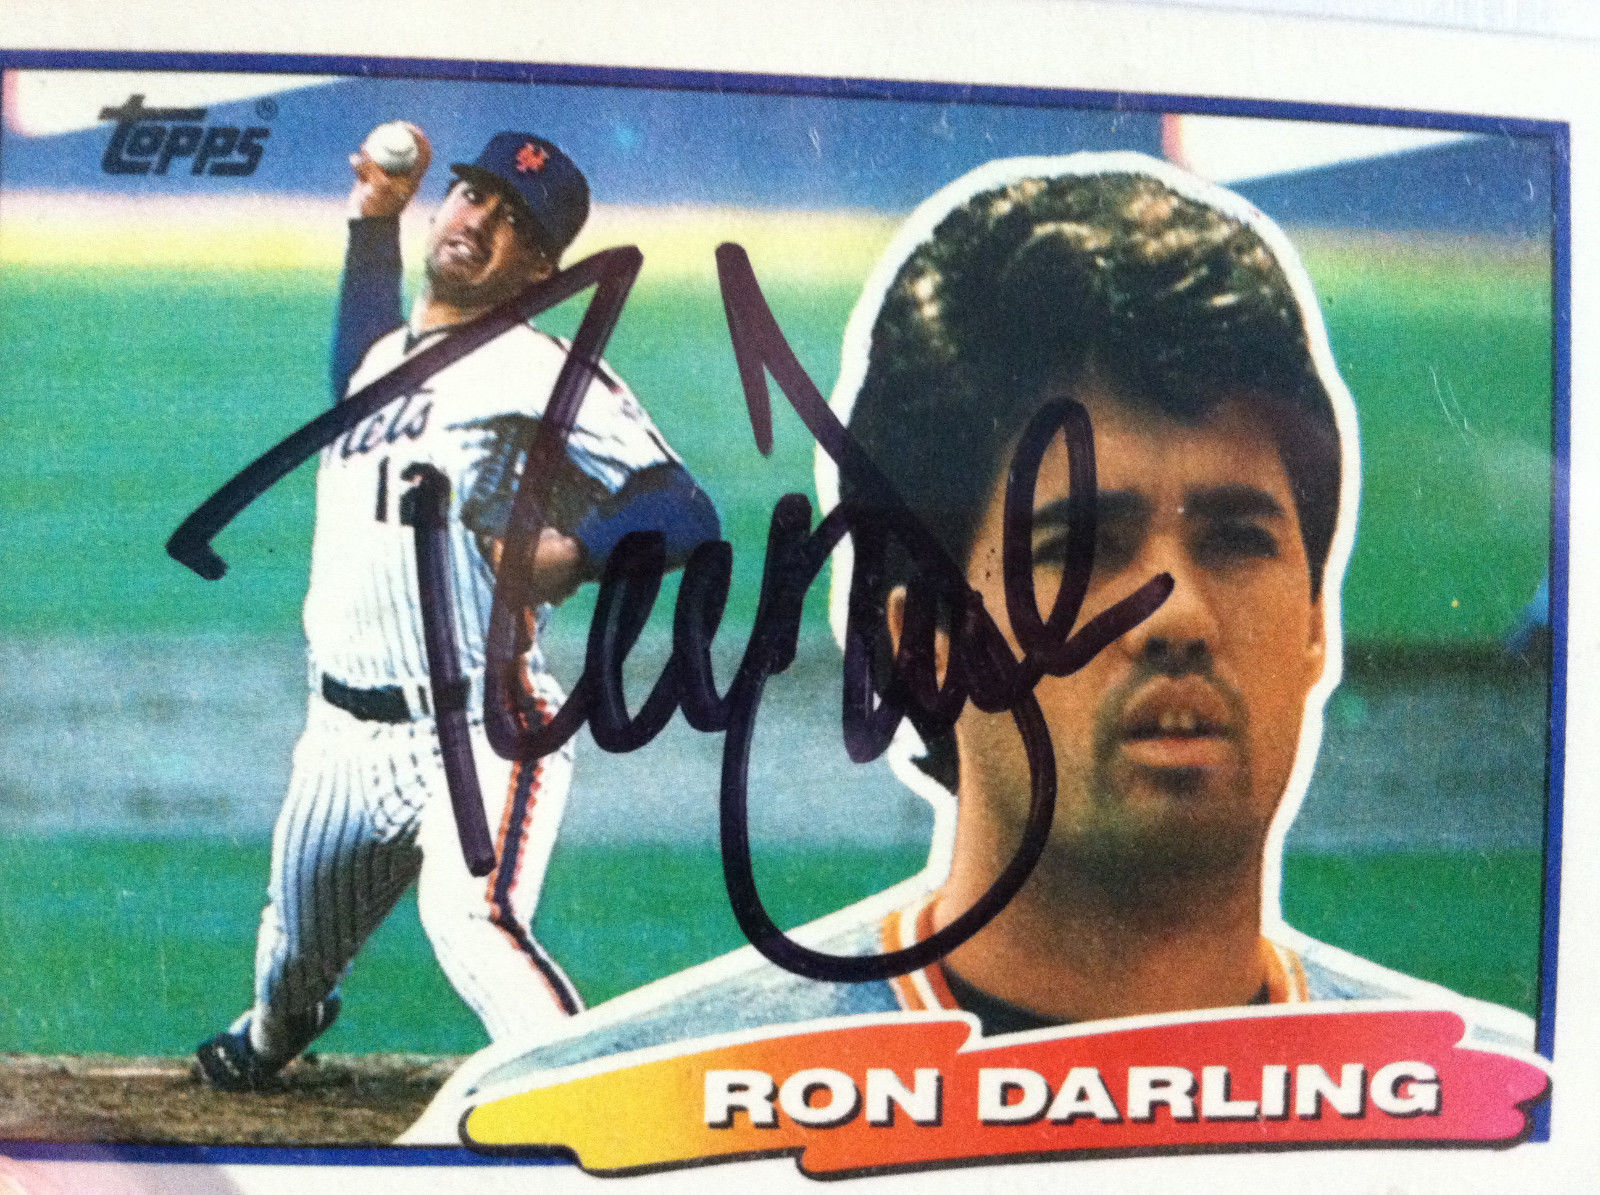 RON DARLING AUTOGRAPHED BASEBALL CARD NEW YORK METS